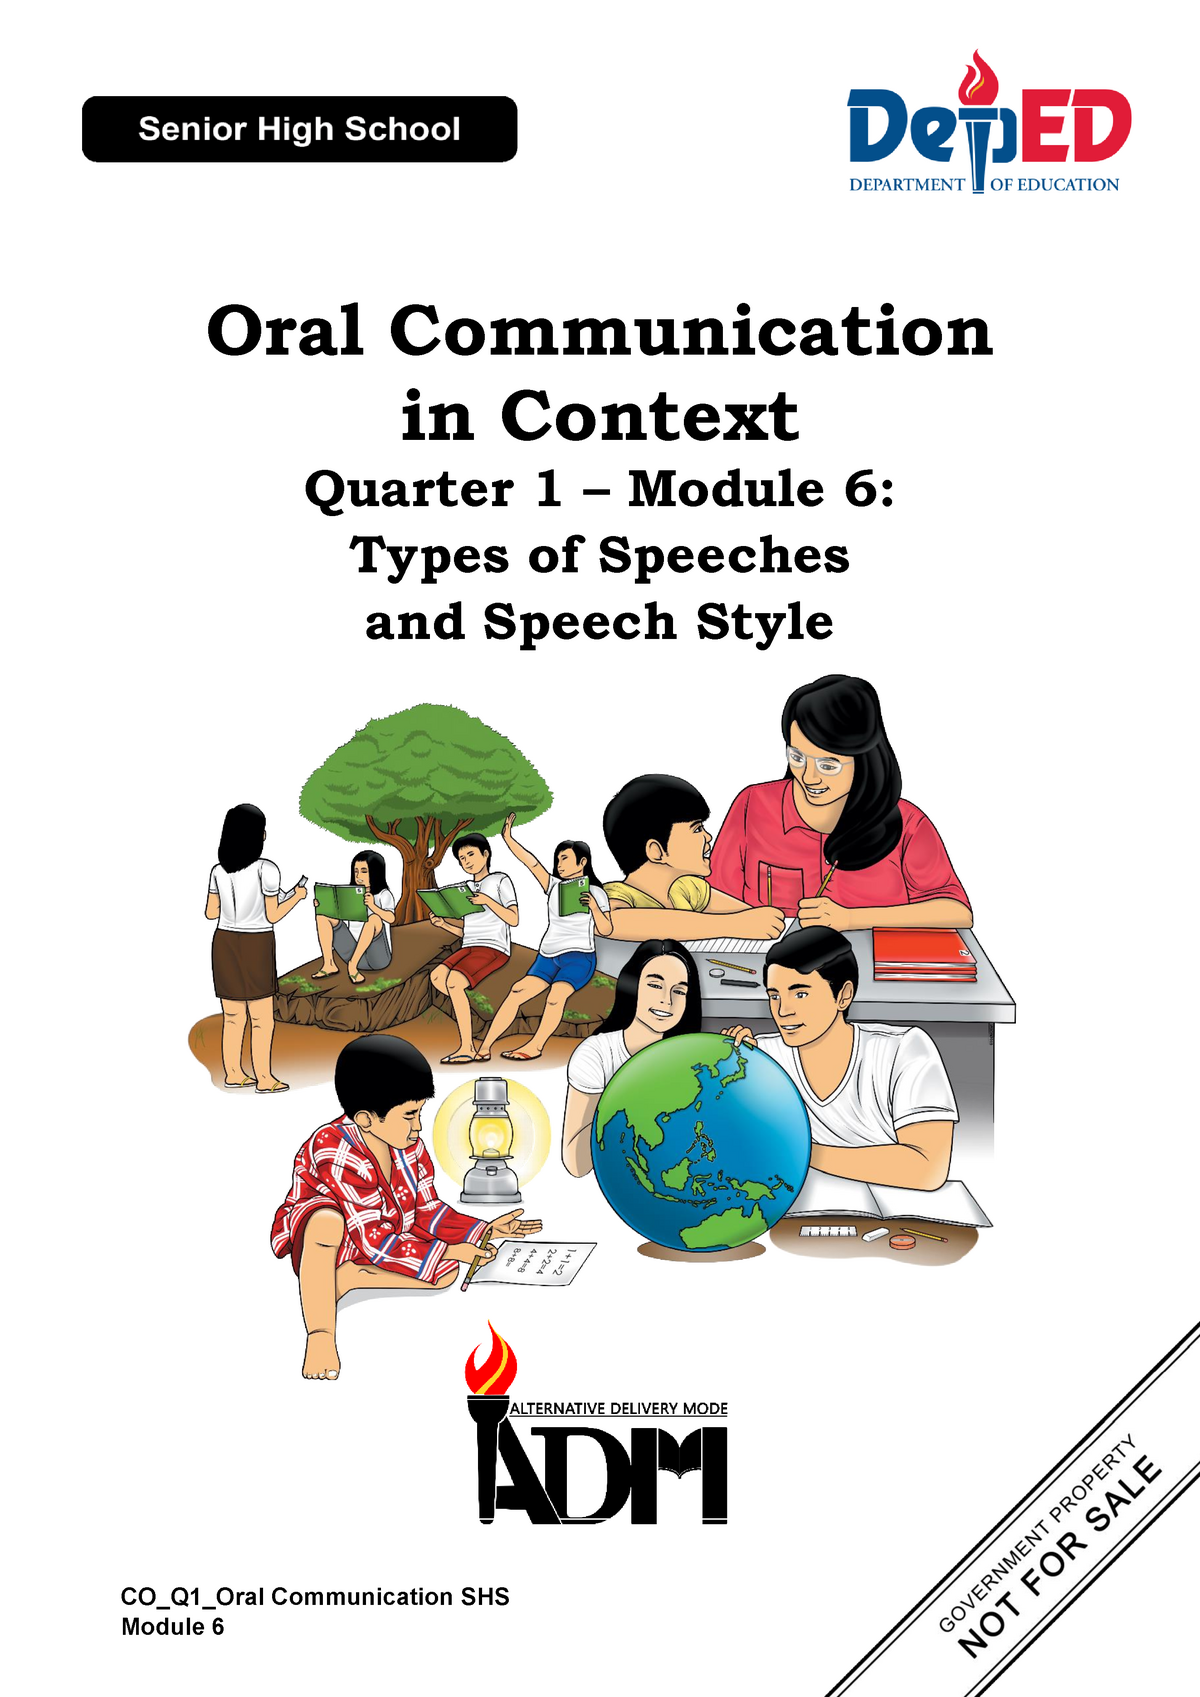 types of speech context oral communication module